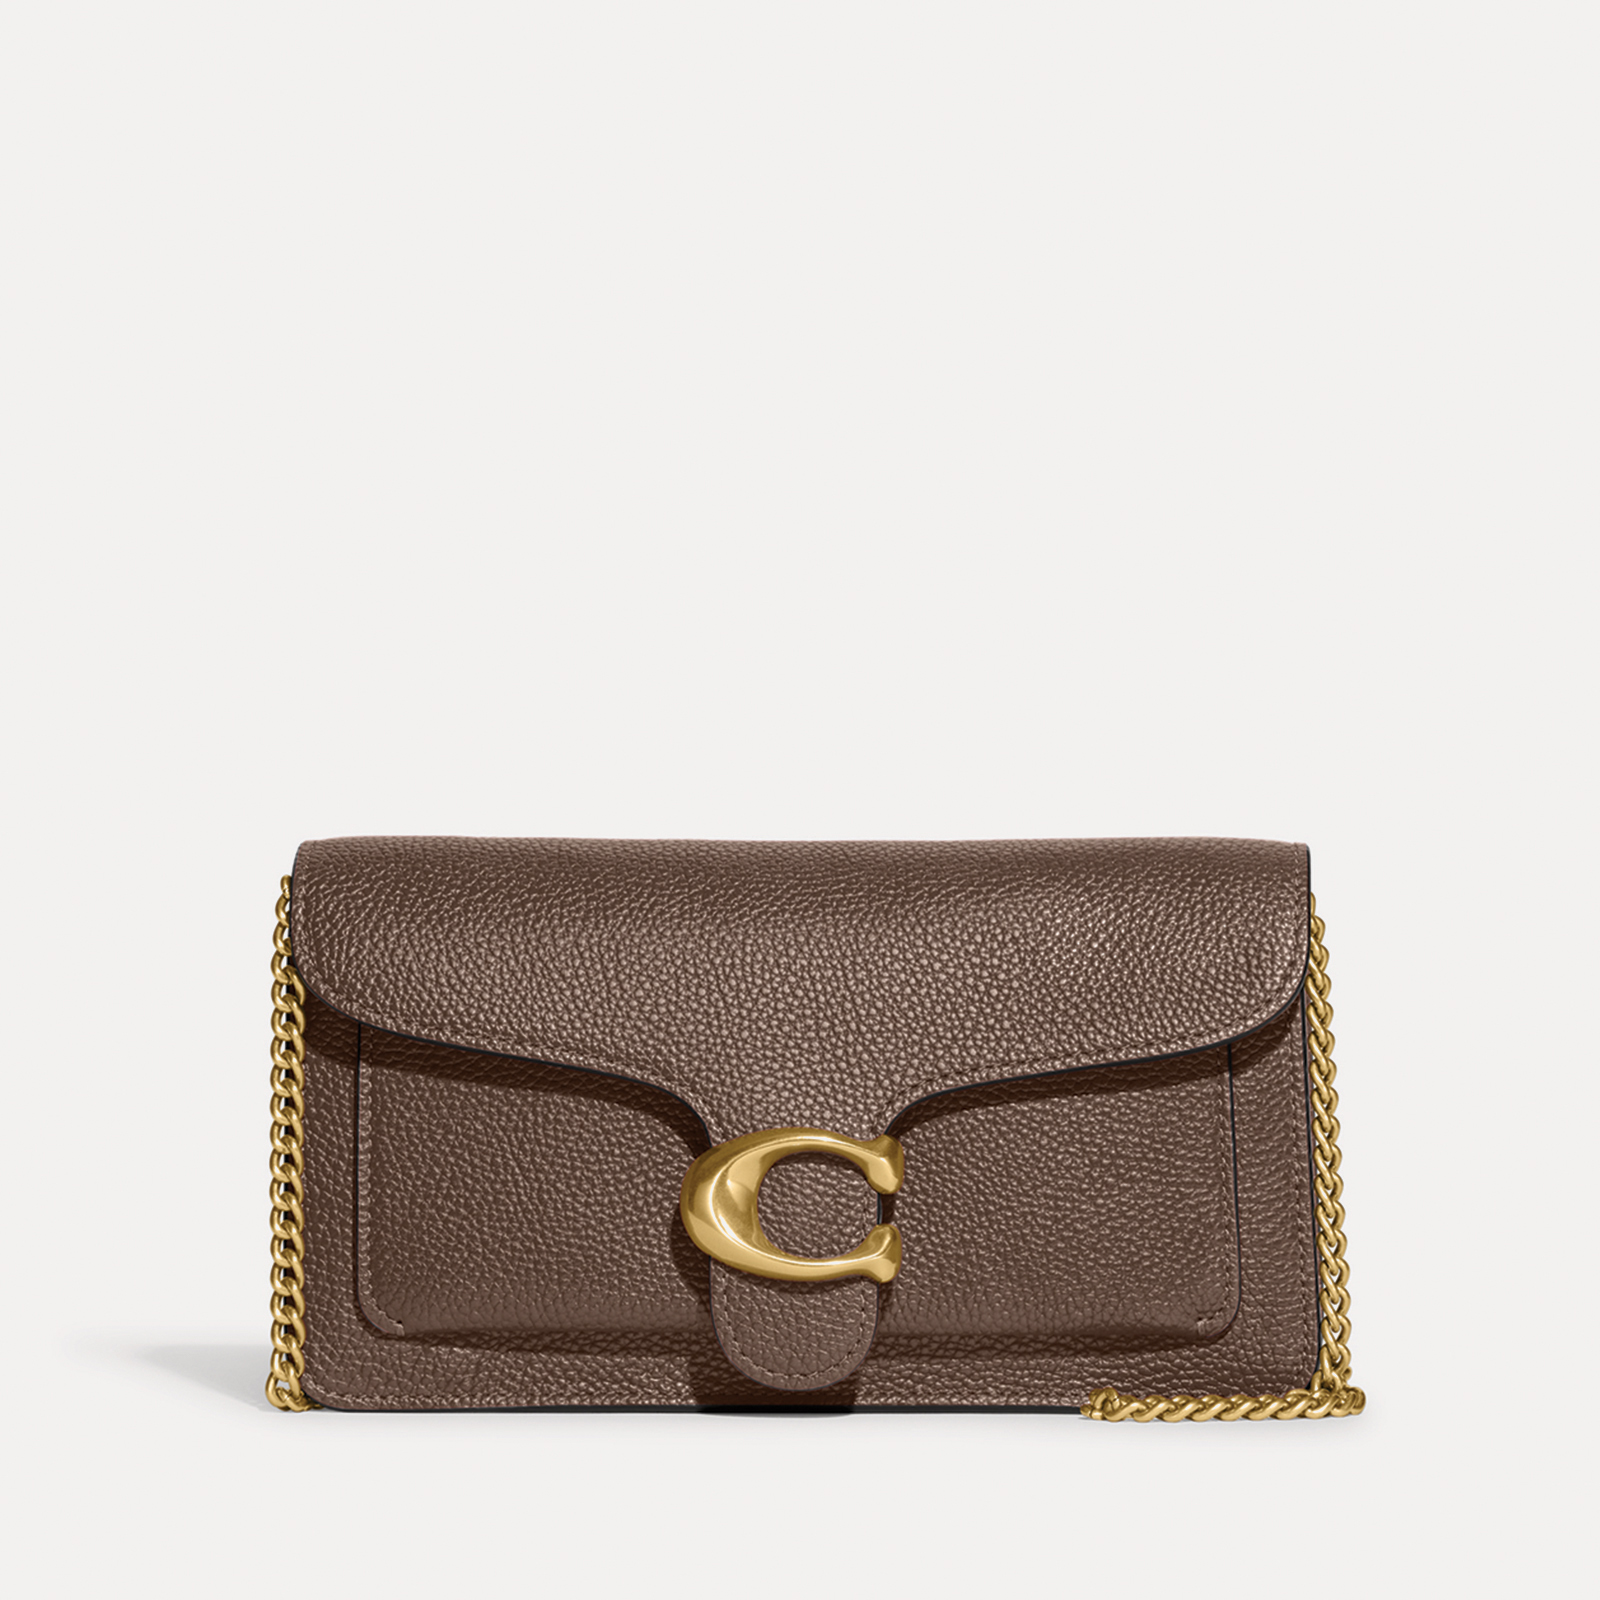 Coach Tabby Chain Leather Clutch Bag | Coggles